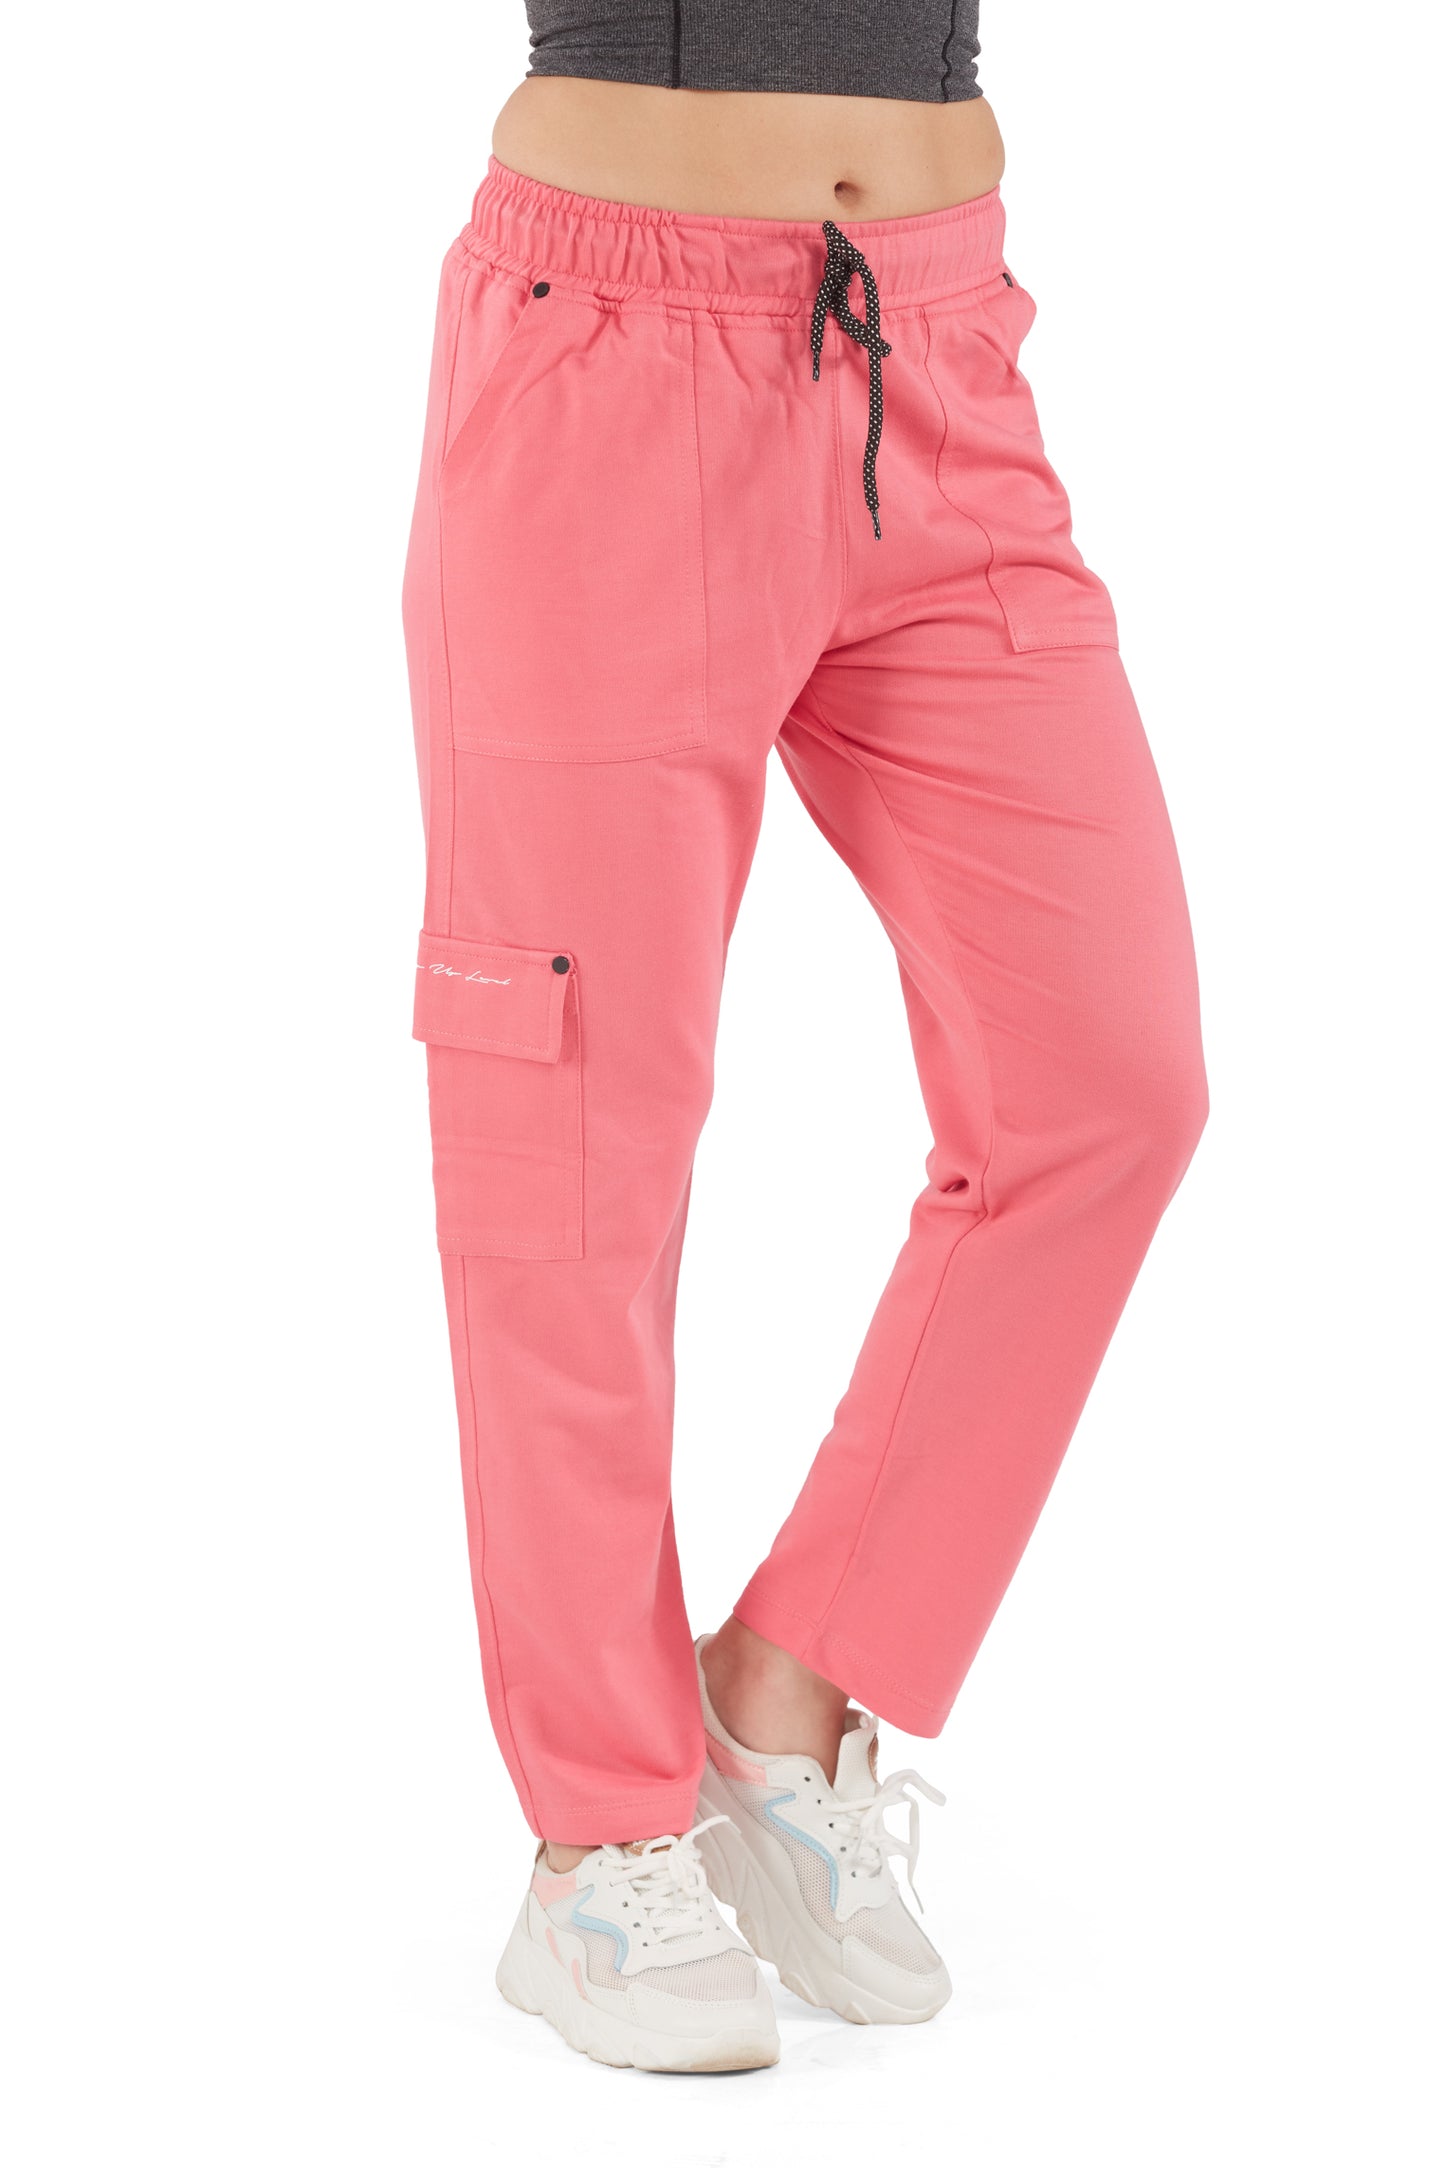 Stylish Pink Plain Cotton Lounge Pants With Pockets For Women Online In India